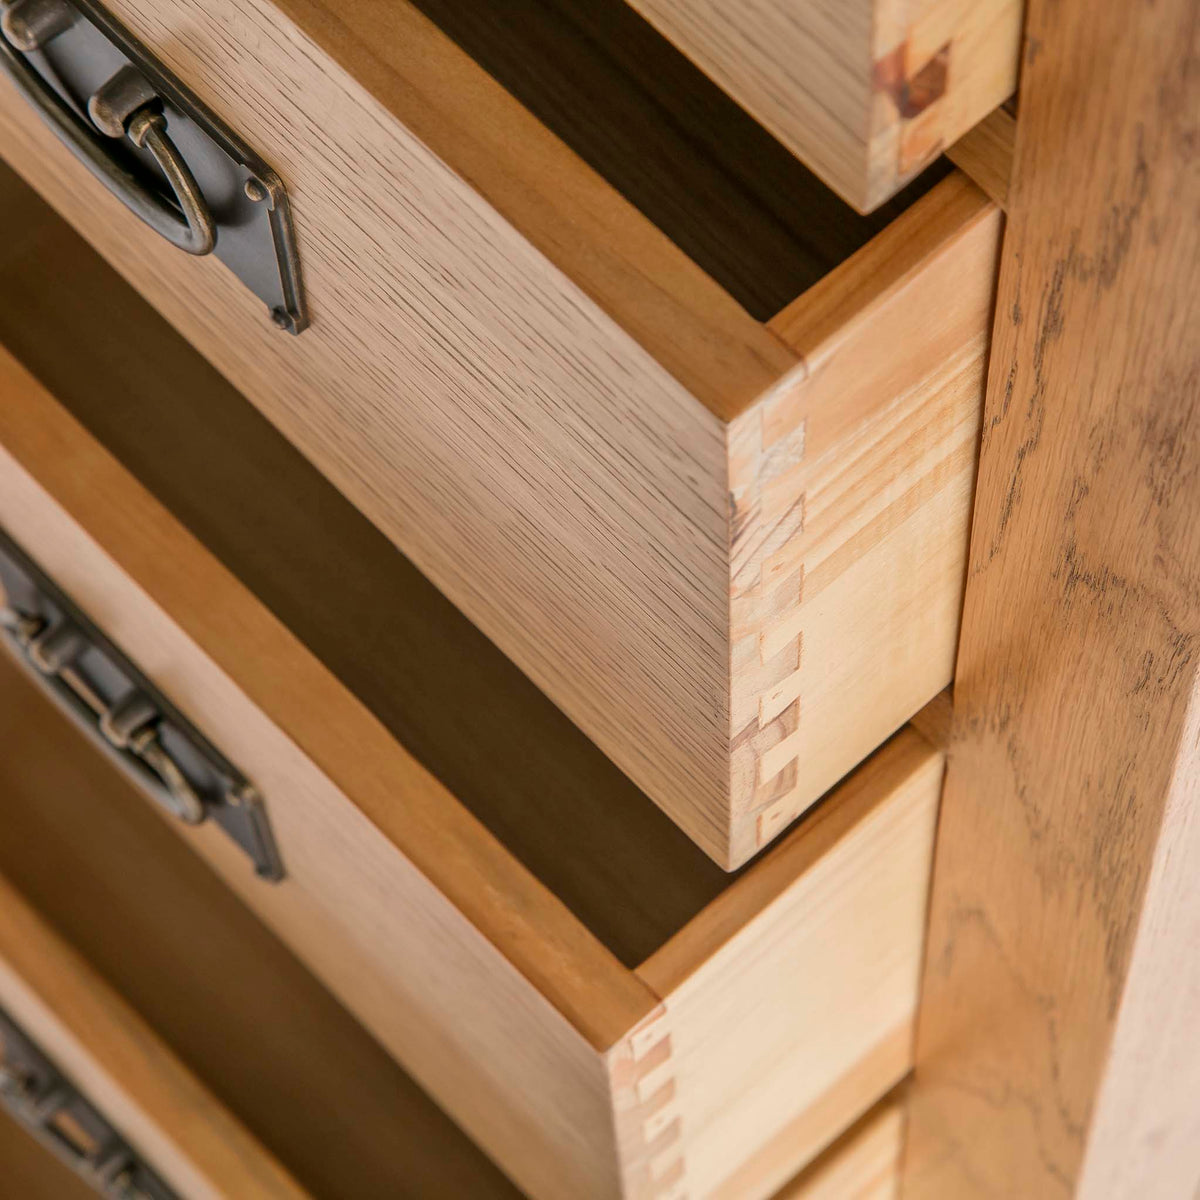 Surrey Oak 5 drawer tallboy chest of 5 drawers - Close up of drawers while open